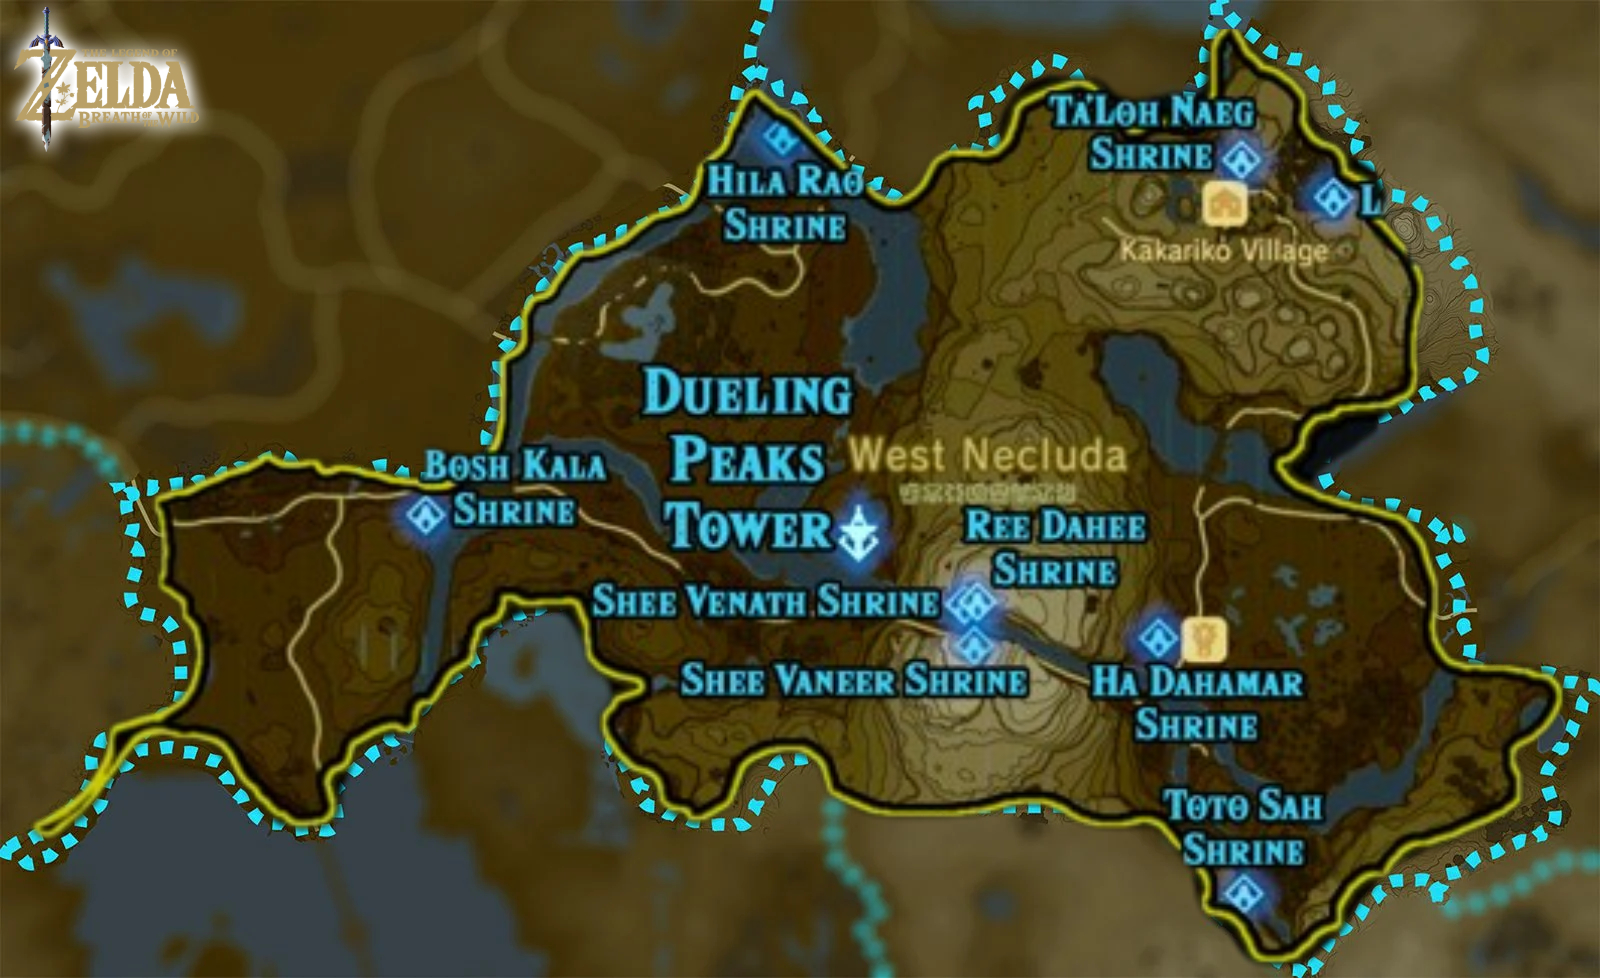 You are currently viewing All Shrine Locations In Dueling Peaks In Zelda: Breath Of The Wild 